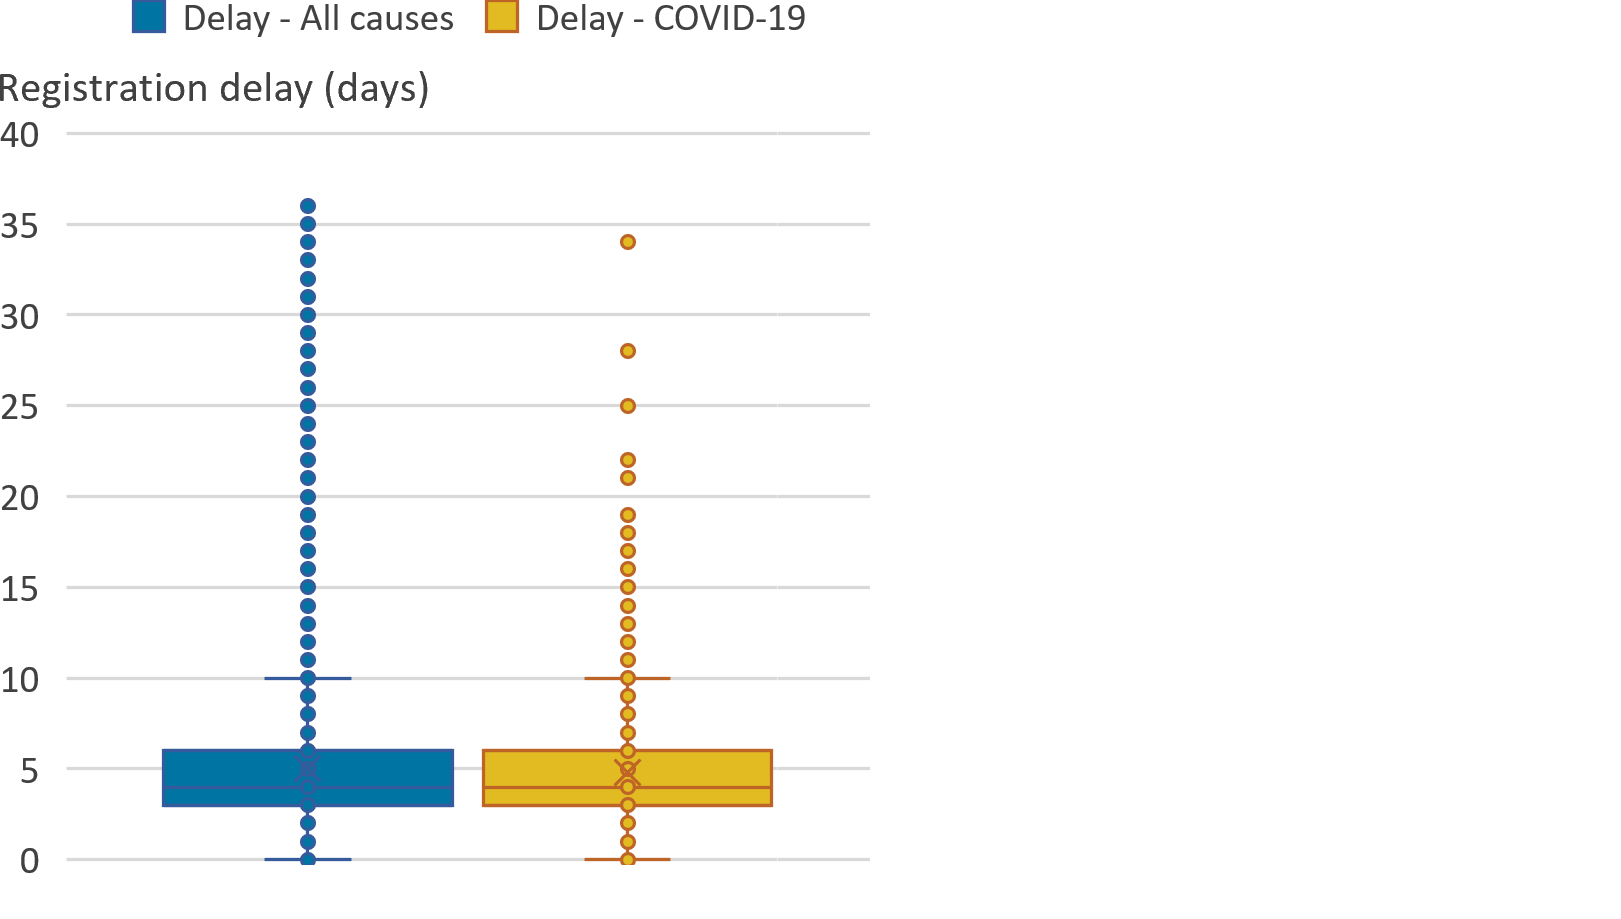 The median delay in registrations for March 2020 was the same for both coronavirus (COVID-19) deaths and all causes of death.